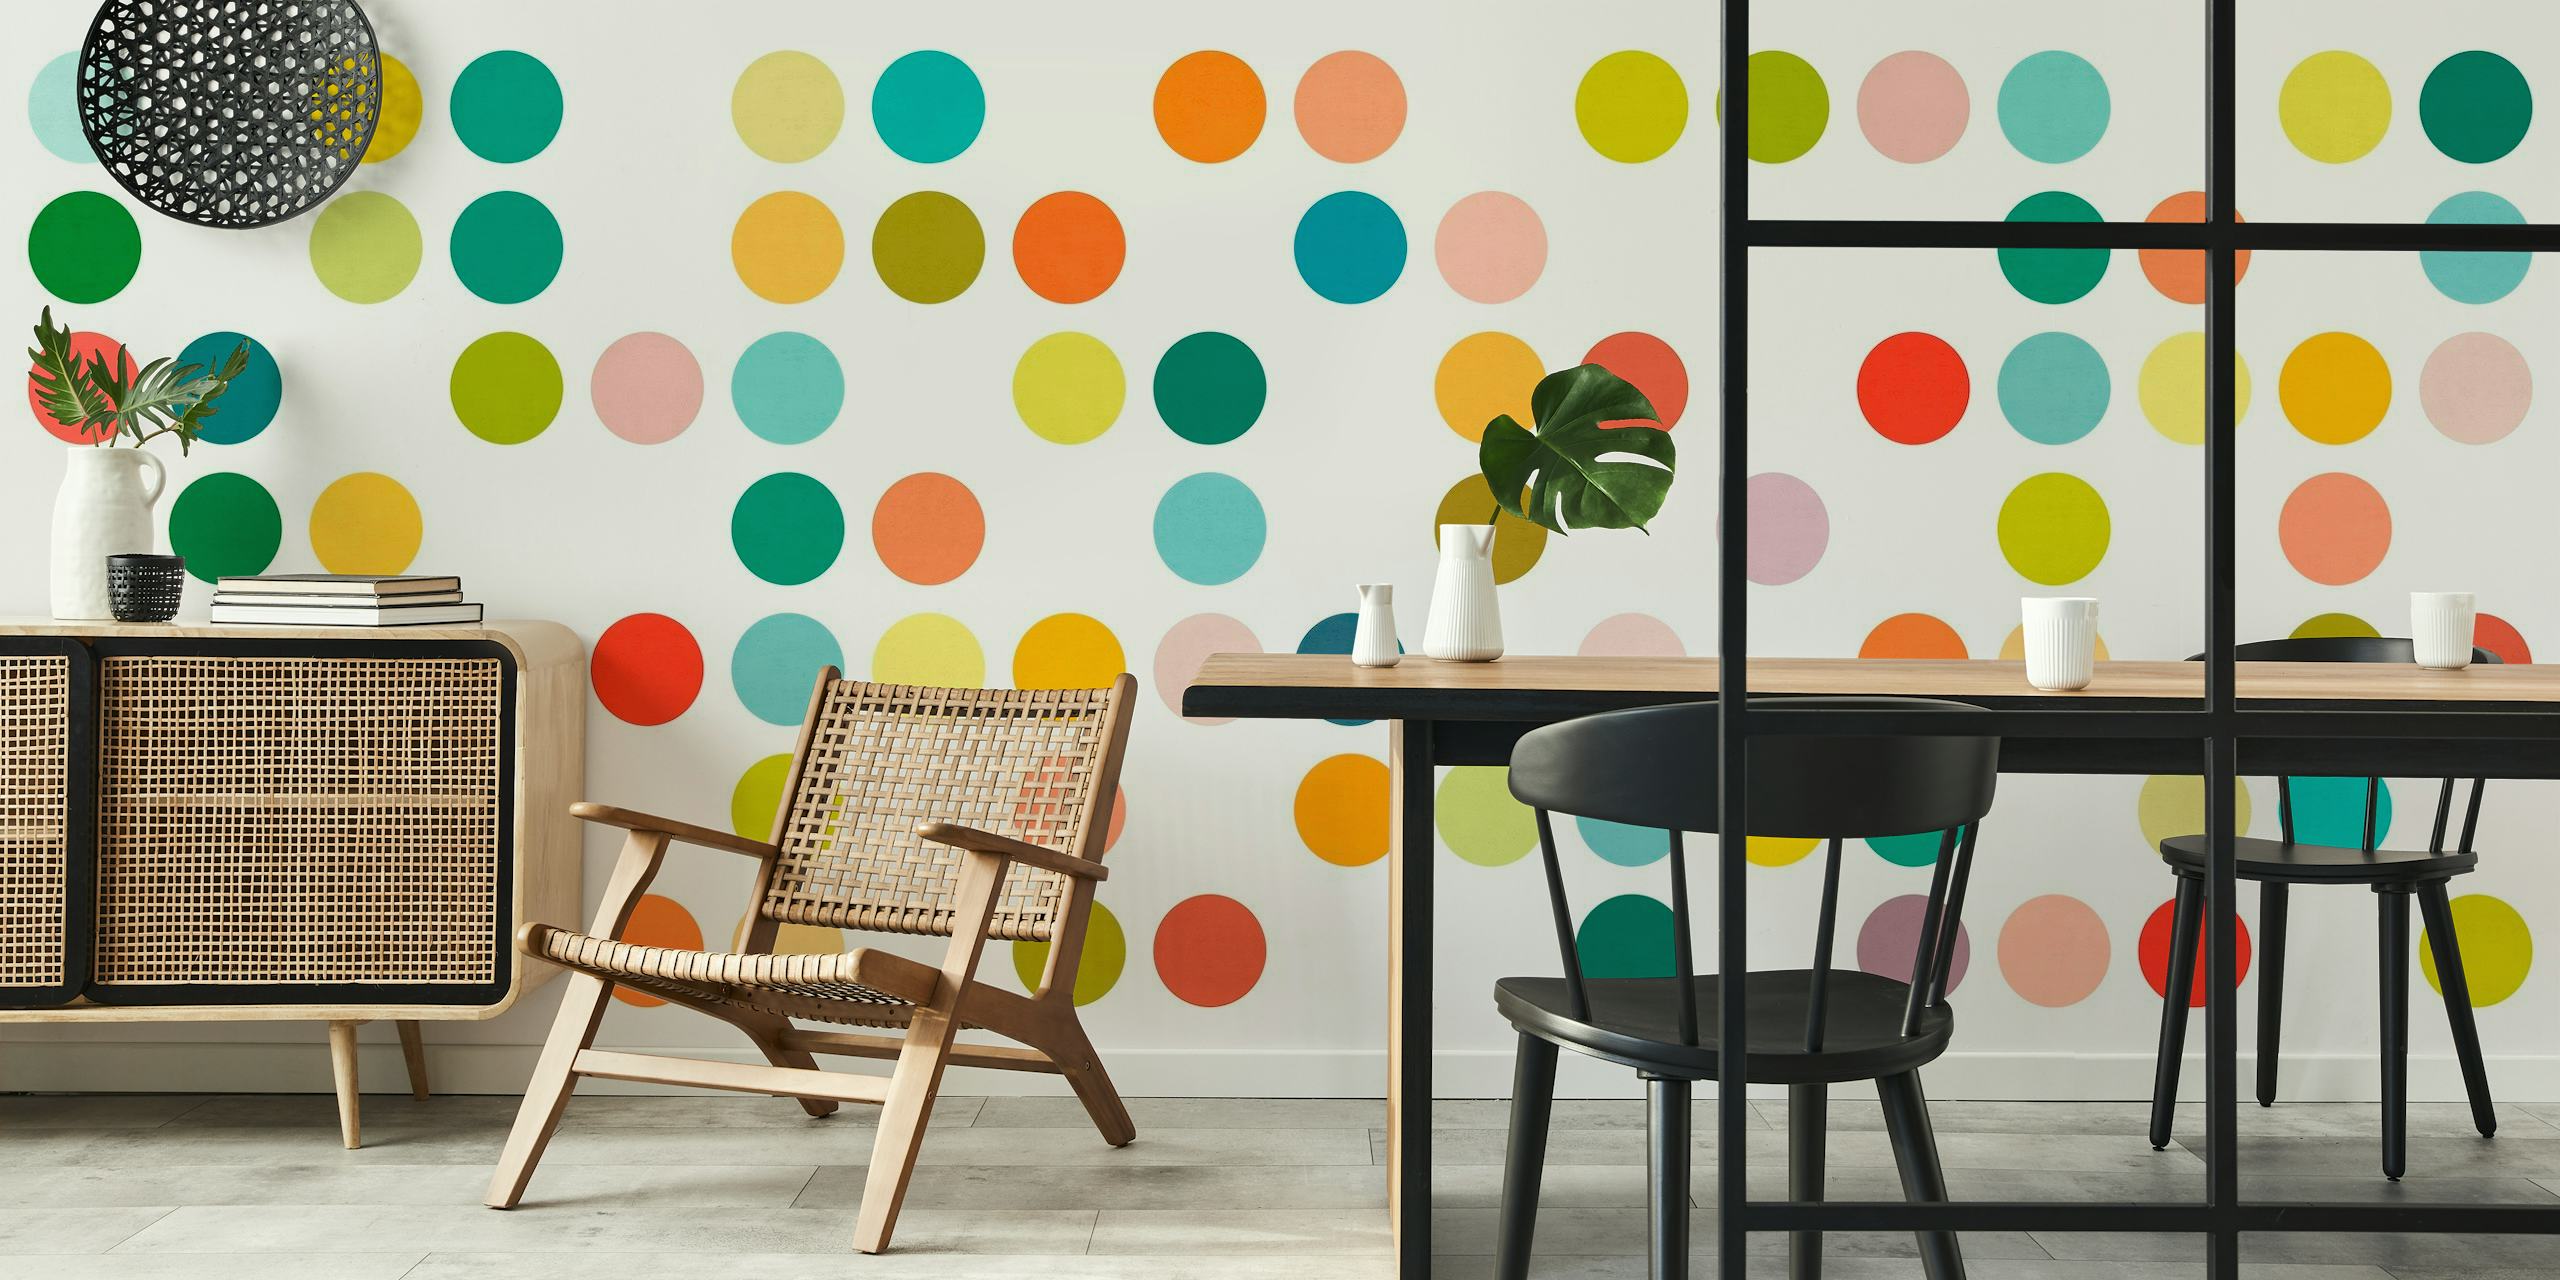 Colorful dot pattern wall mural with multi-sized circles in varying shades